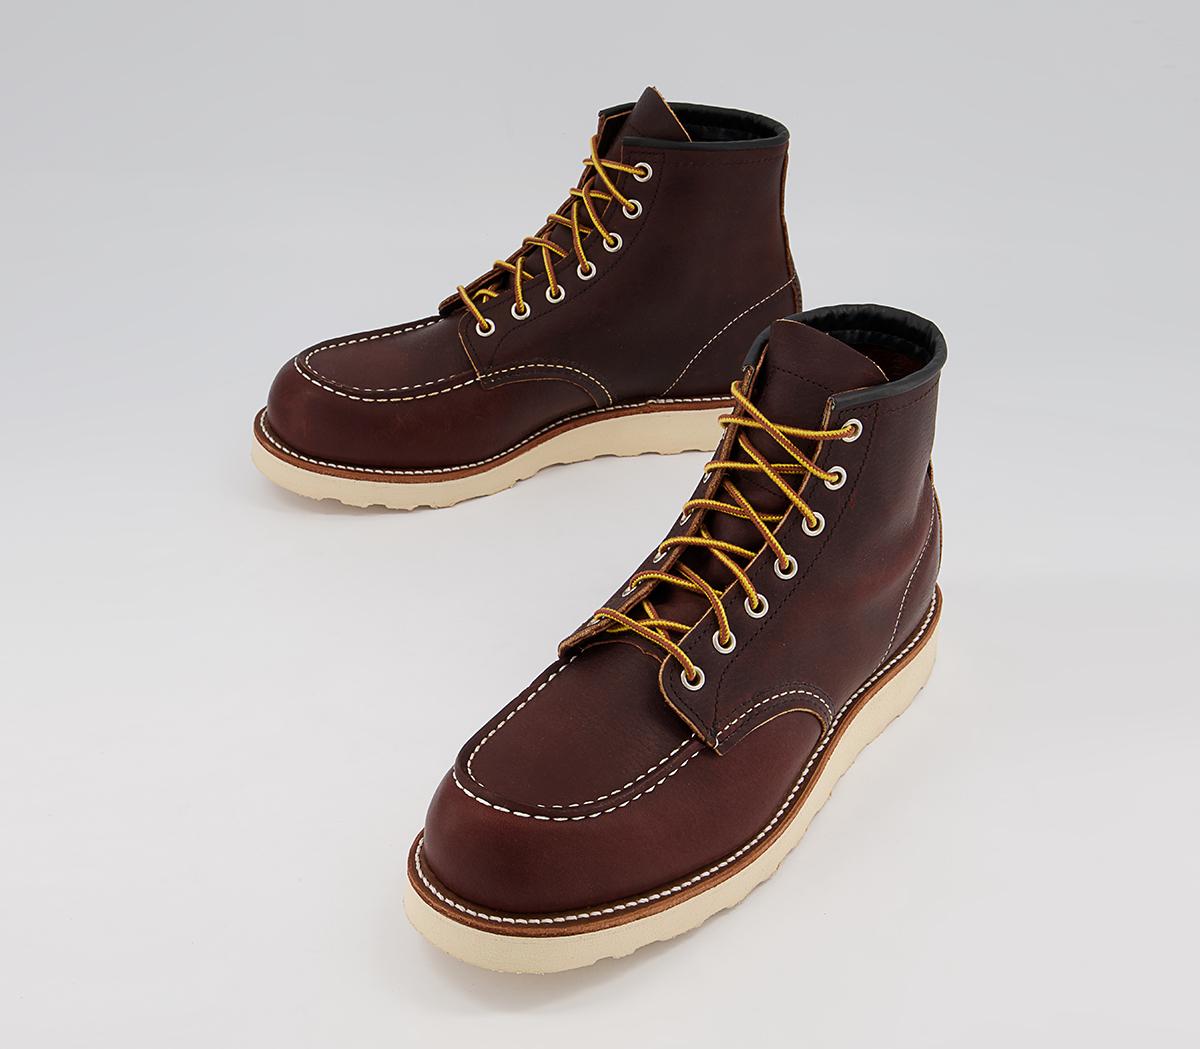 Red Wing Work Wedge Boots Brown Leather - Men’s Boots